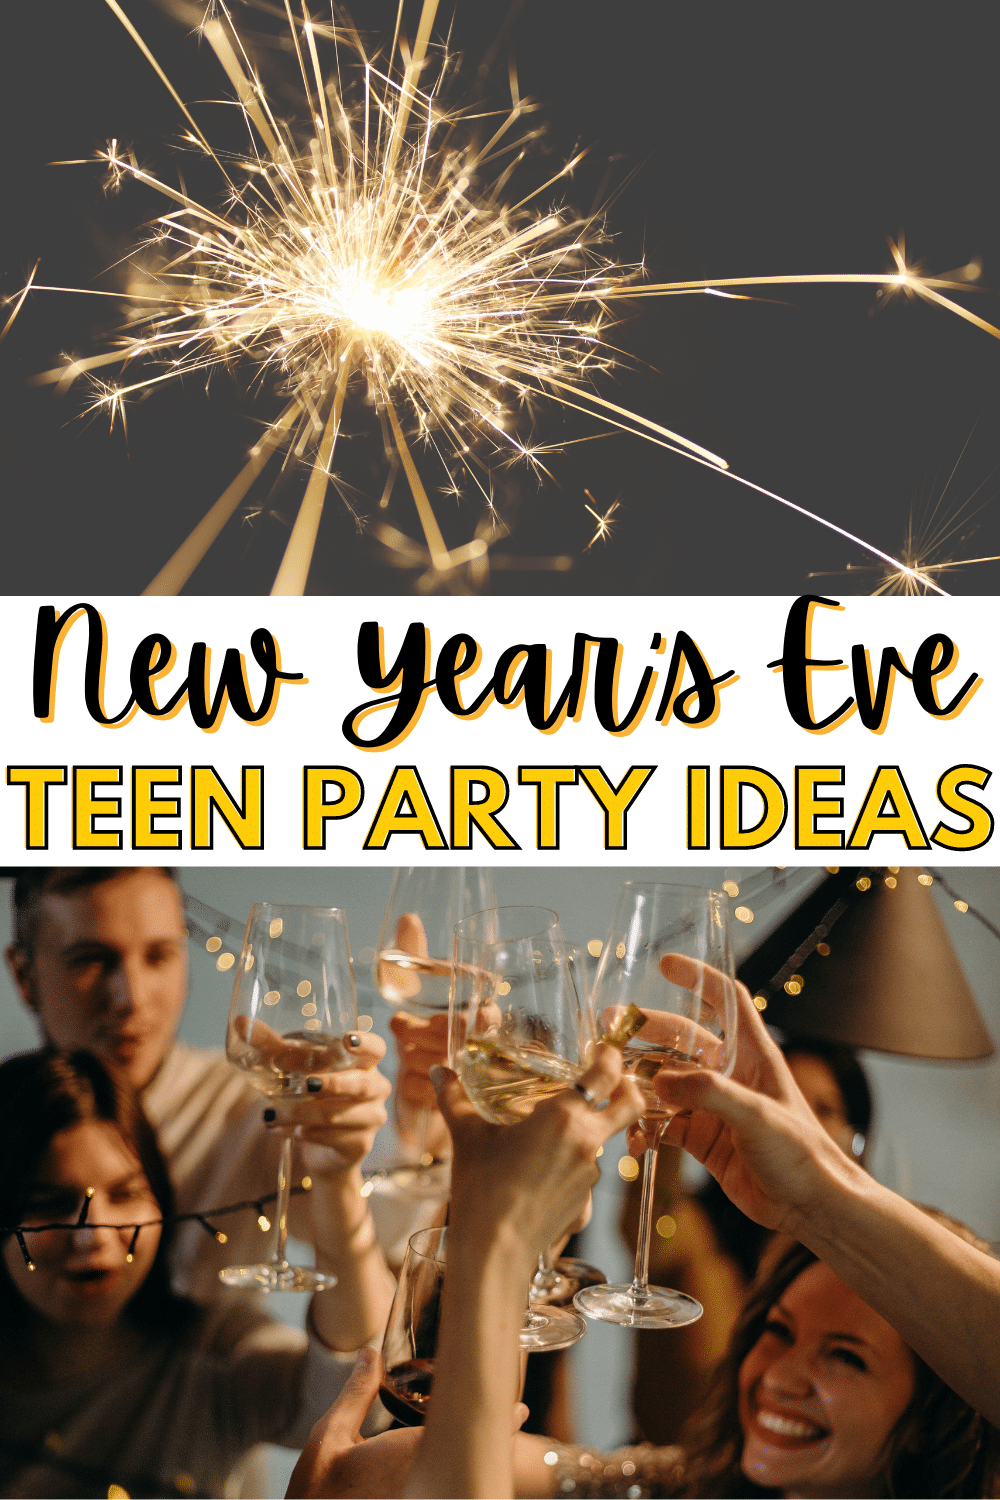 New Year's Eve Party Ideas for Teens developed with the help of teens, including food, entertainment, decorations and even some extra ideas. #newyearseve #teenagers #teens #party via @wondermomwannab